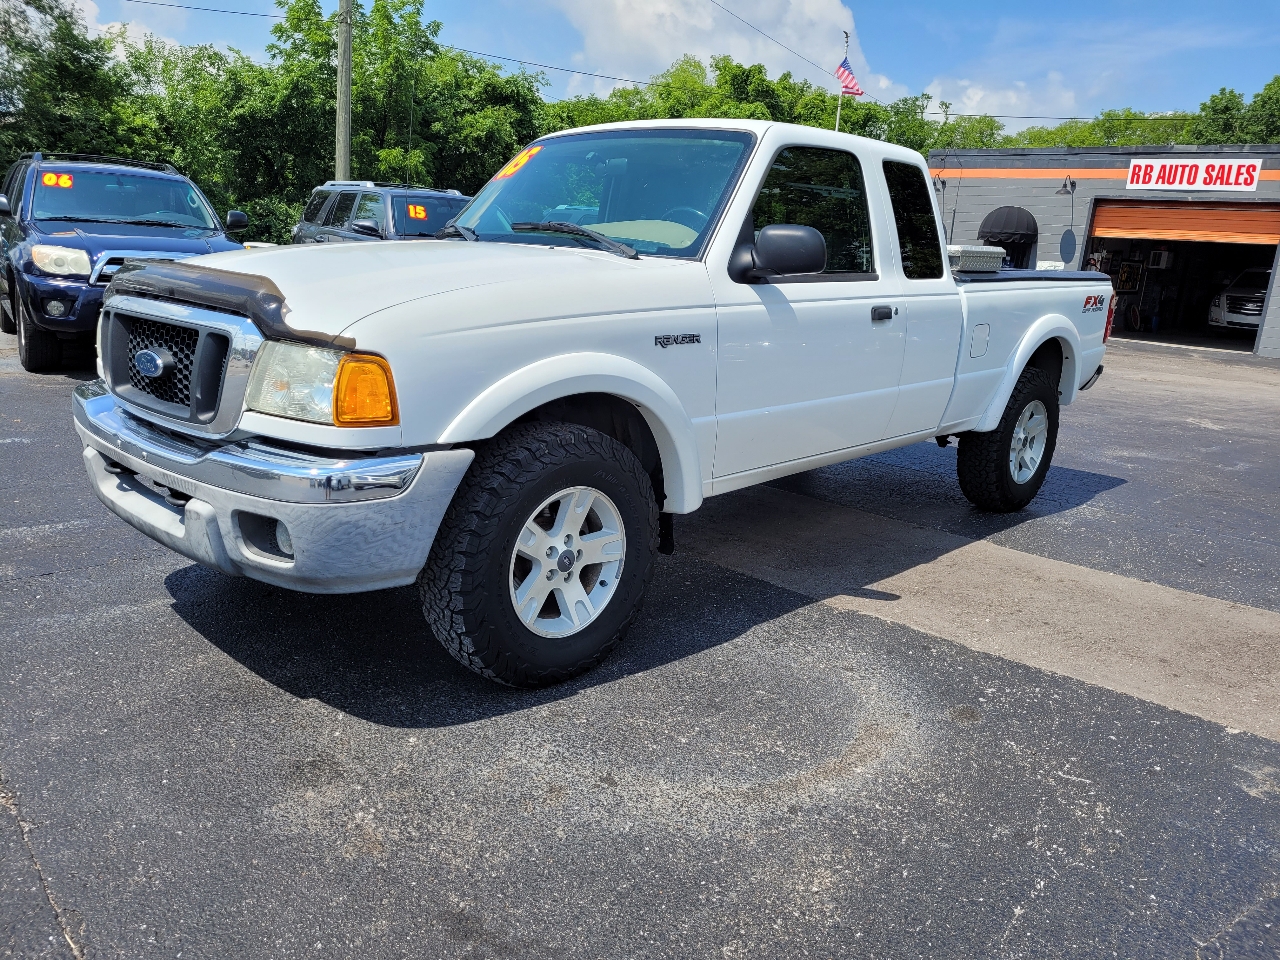 2005 Ford Ranger 4dr Supercab 126" WB FX4 Lvl II 4WD